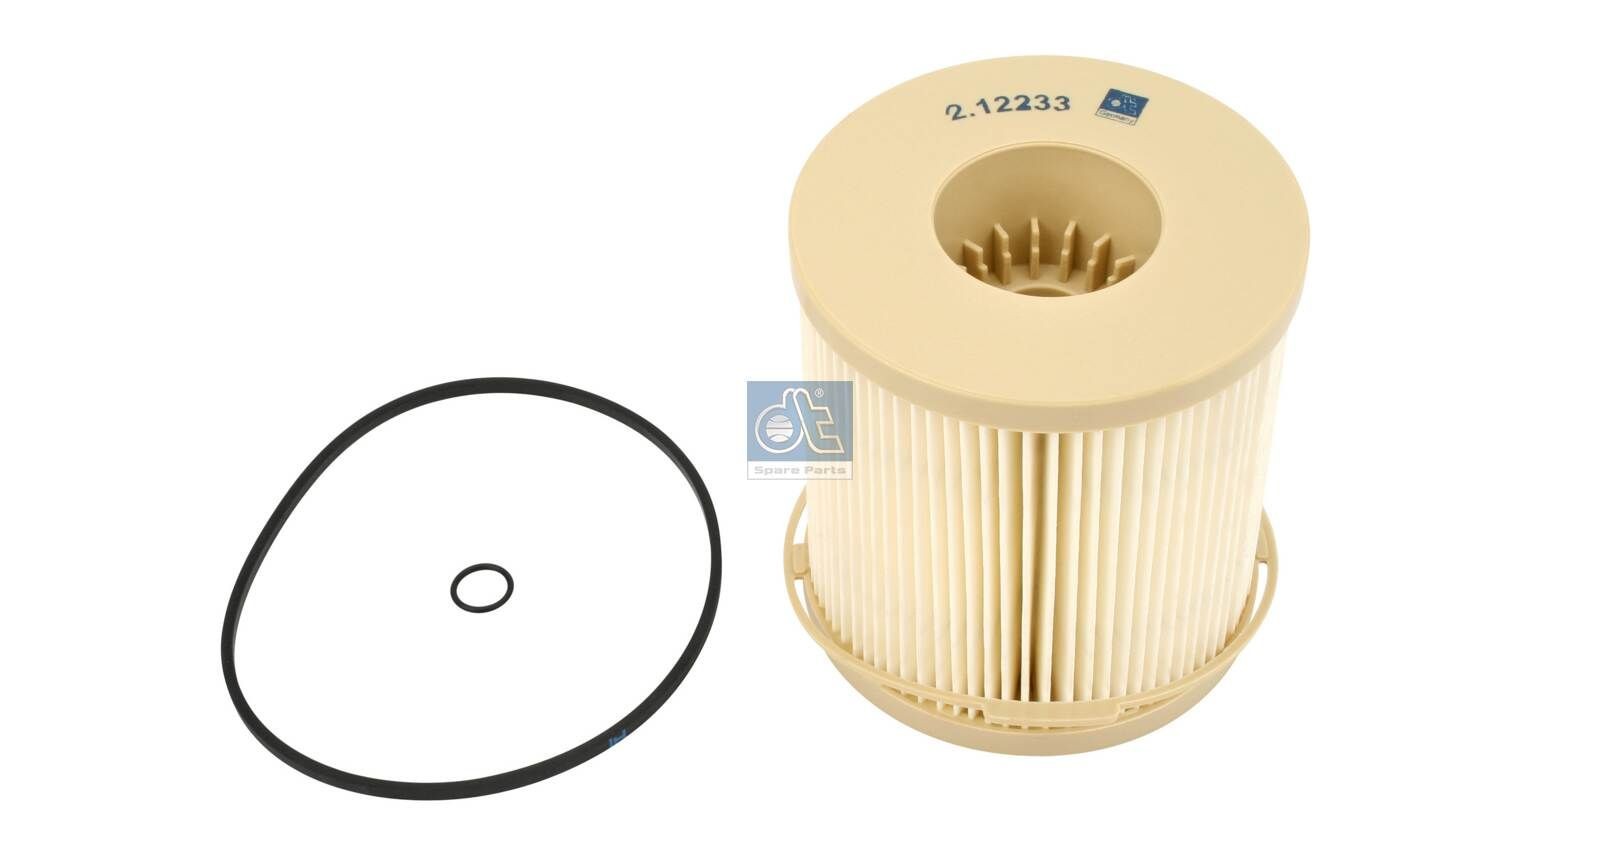 E7040KP10 DT Spare Parts Filter Insert Height: 118mm Inline fuel filter 2.12233 buy